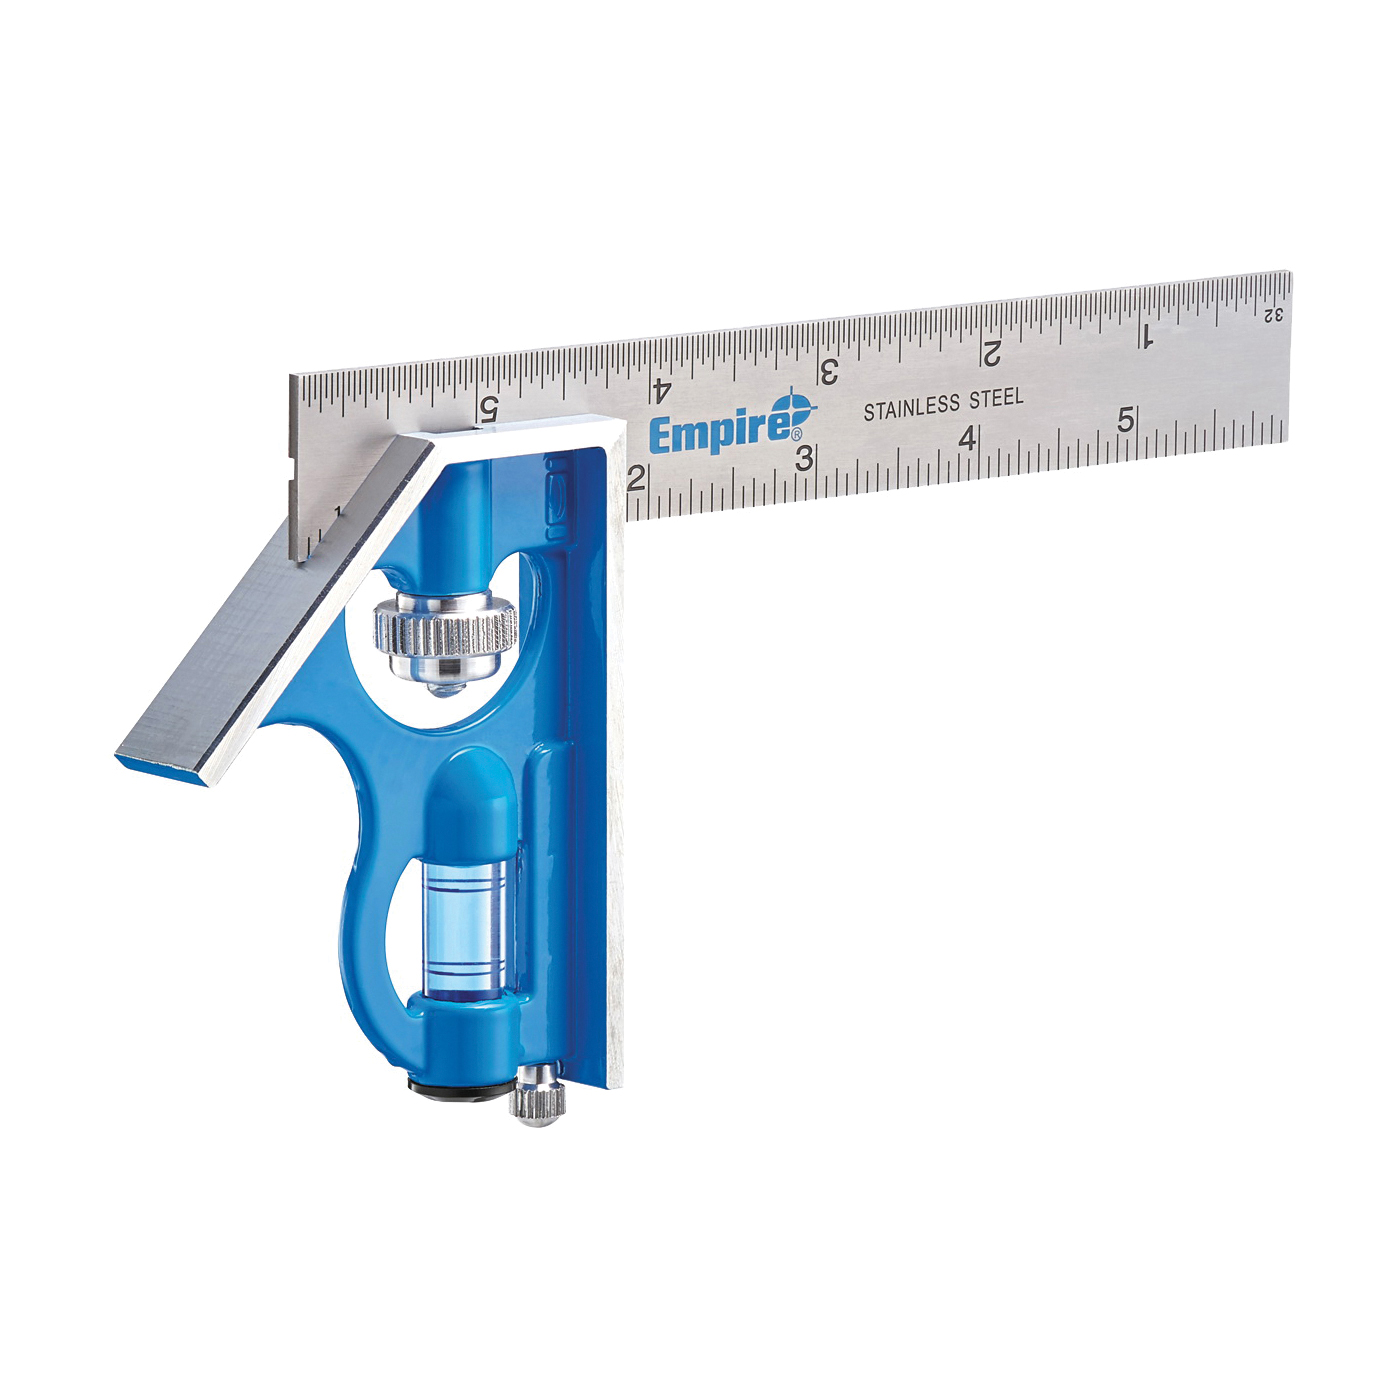 Empire True Blue Series E255 Combination Square, 6 in L Blade, SAE Graduation, Stainless Steel Blade - 1